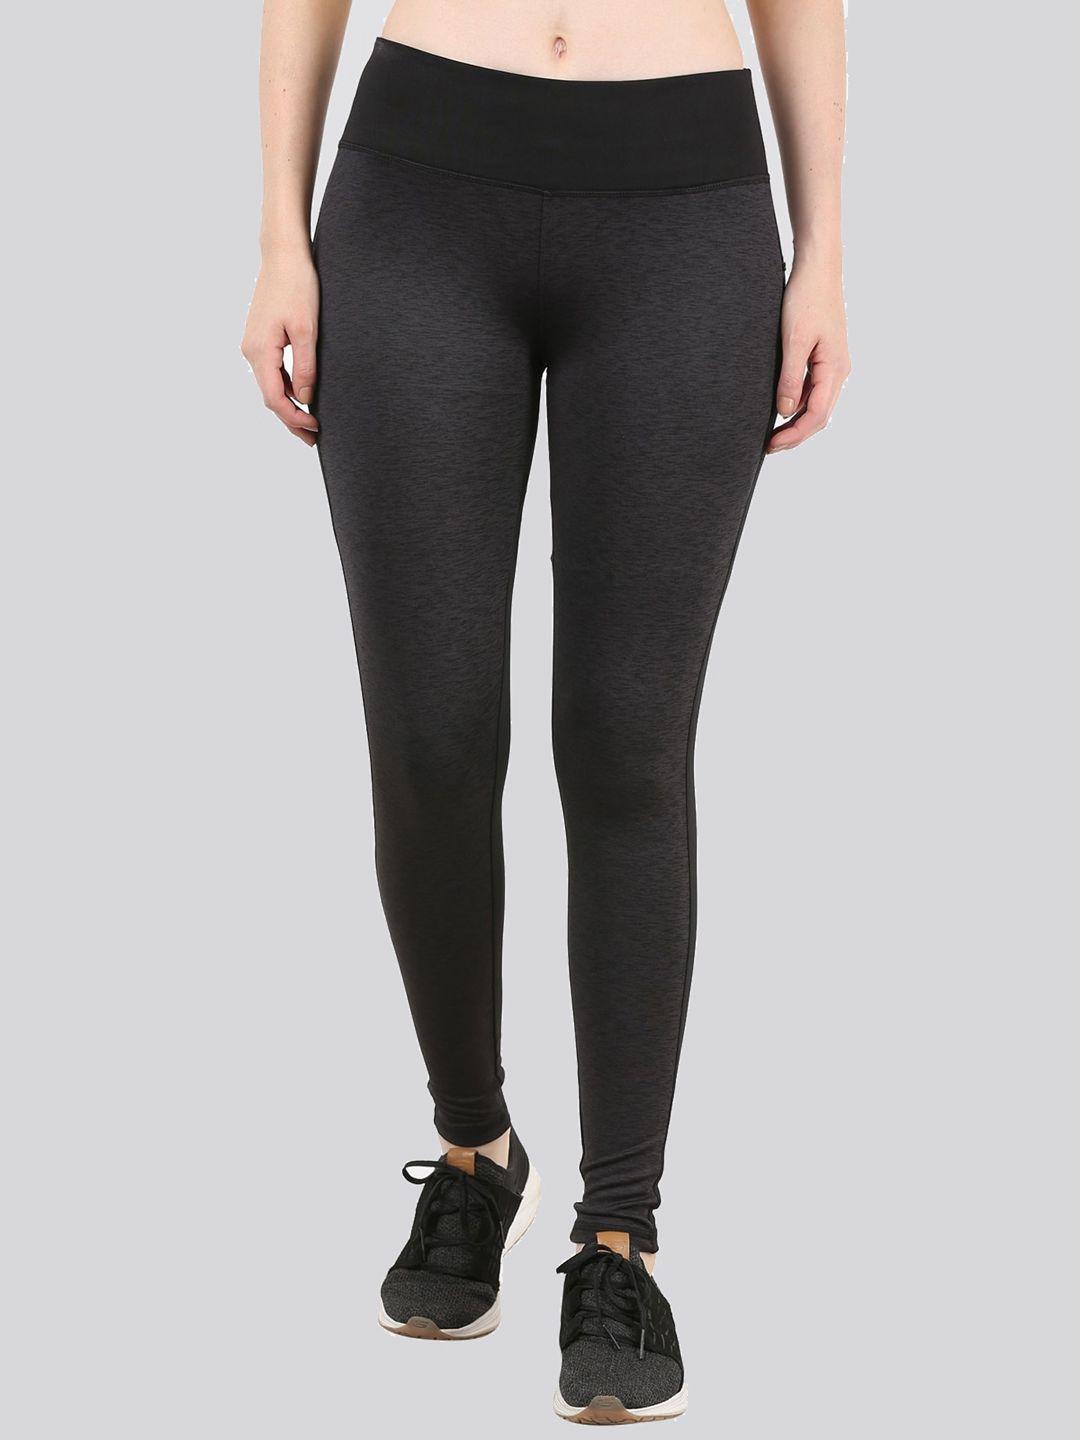 the dance bible women solid rapid-dry training tights